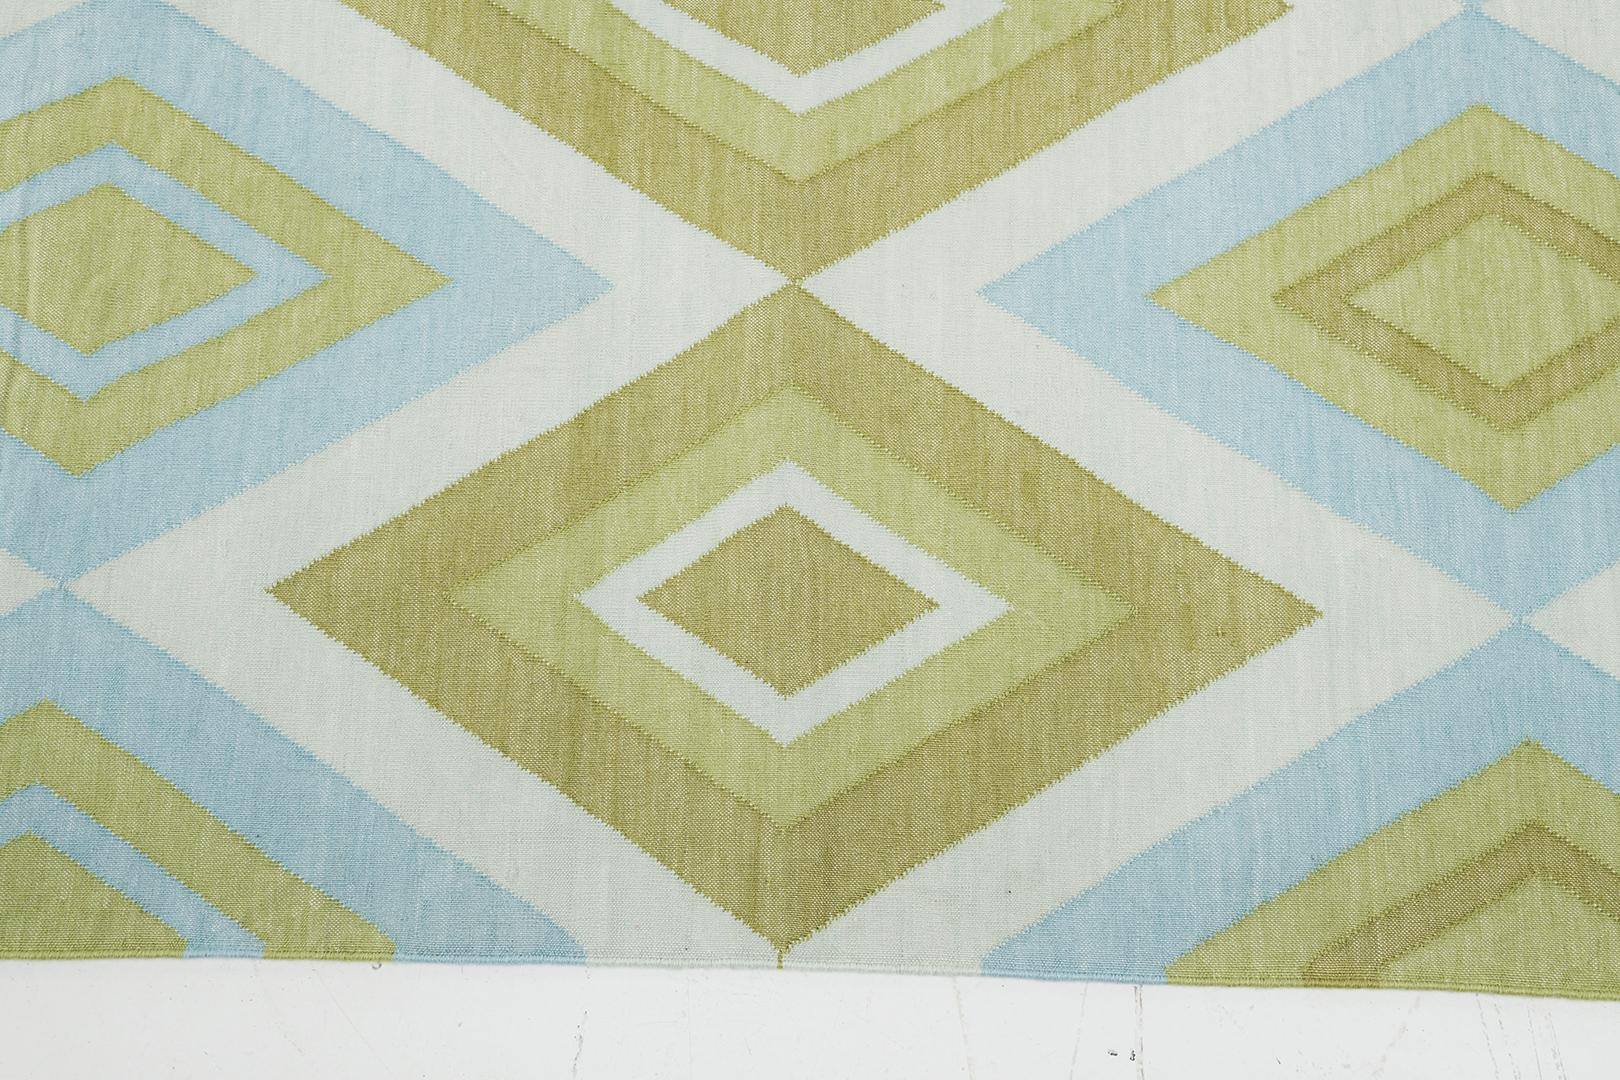 Permata’ in Cricket creates a bewildering illusion of stacked lozenges rendered in the pleasant colour combination of fern green and sky blue. Breathtaking and compelling, this rug will surely add character to one’s space. Mehraban's Cielo